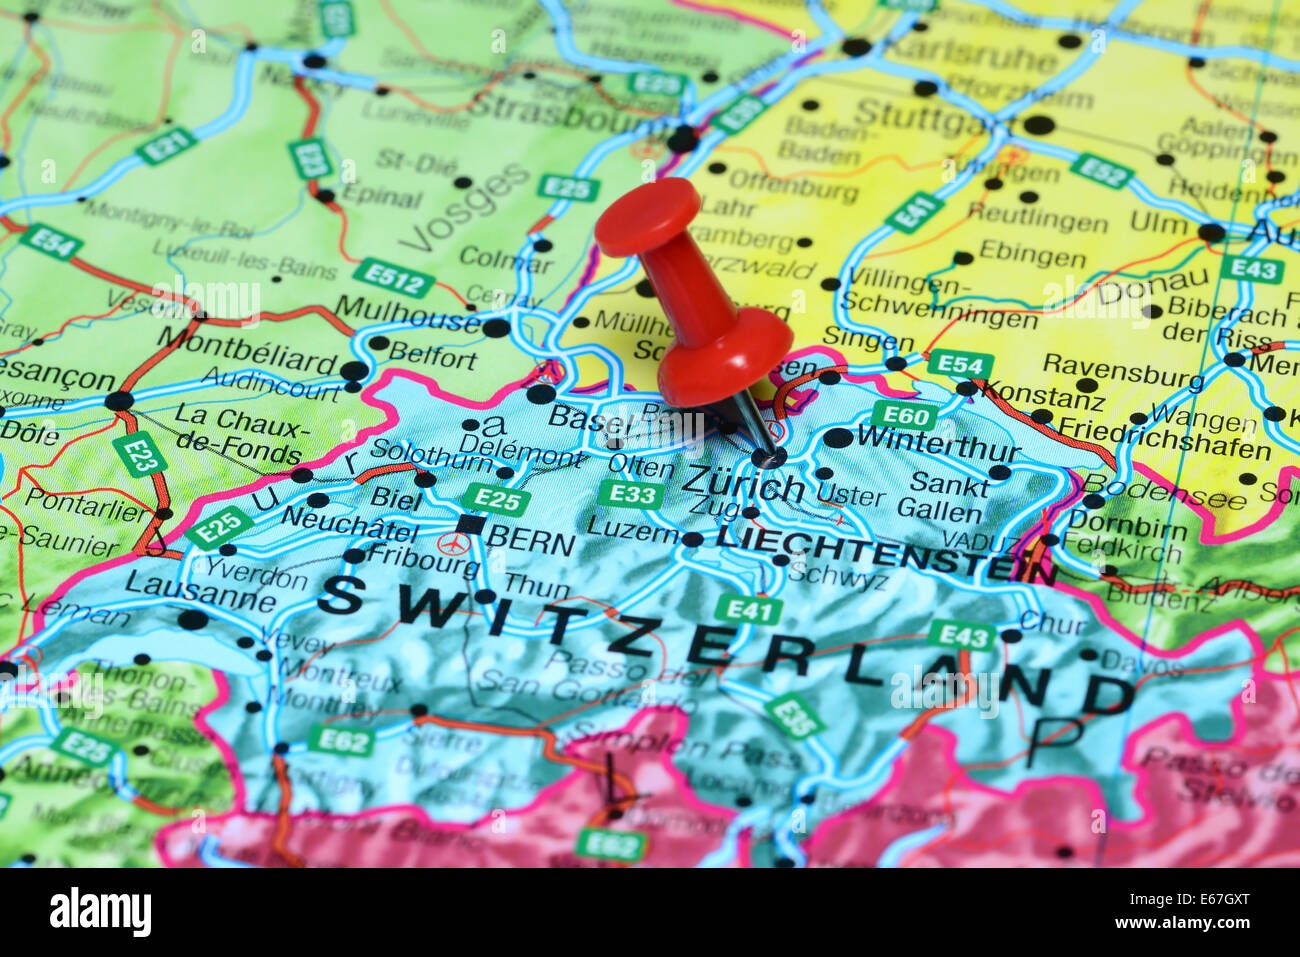 Zurich pinned on a map of europe Stock Photo